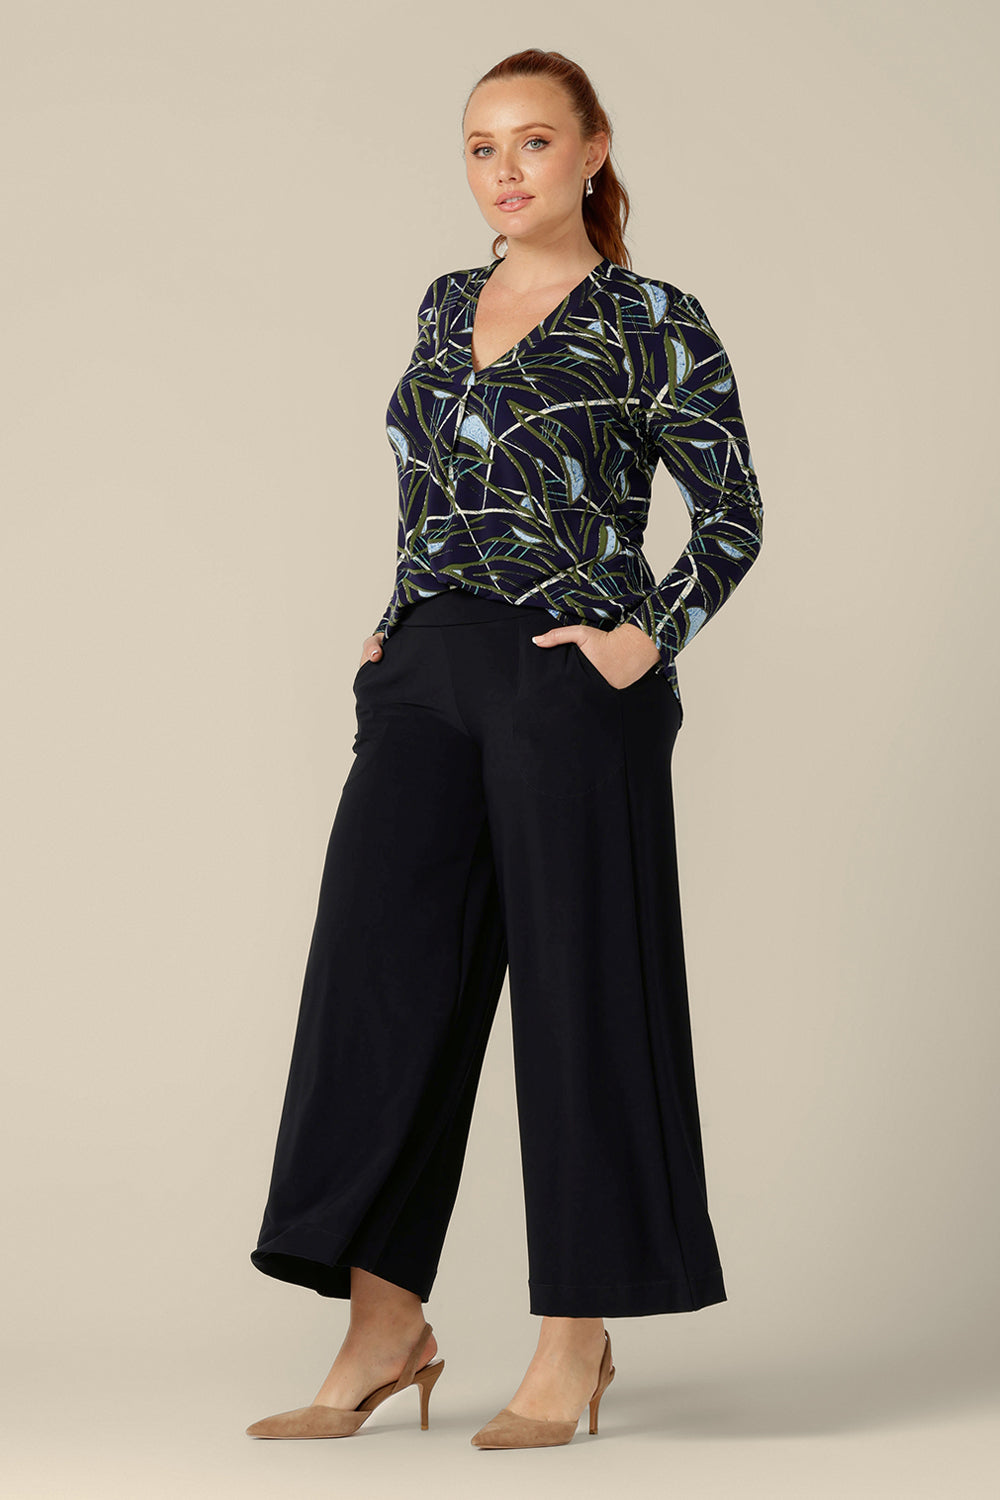 The Dakota Top in Willow is by Australian and New Zealand women's clothing label, L&F. This top has a V-neck with front tuck below that looks great under workwear jackets. Long sleeves make the Dakota Top a good winter top. With a navy-base print, this top is worn here with wide leg , navy trousers. Shop in inclusive sizes, 8-24.